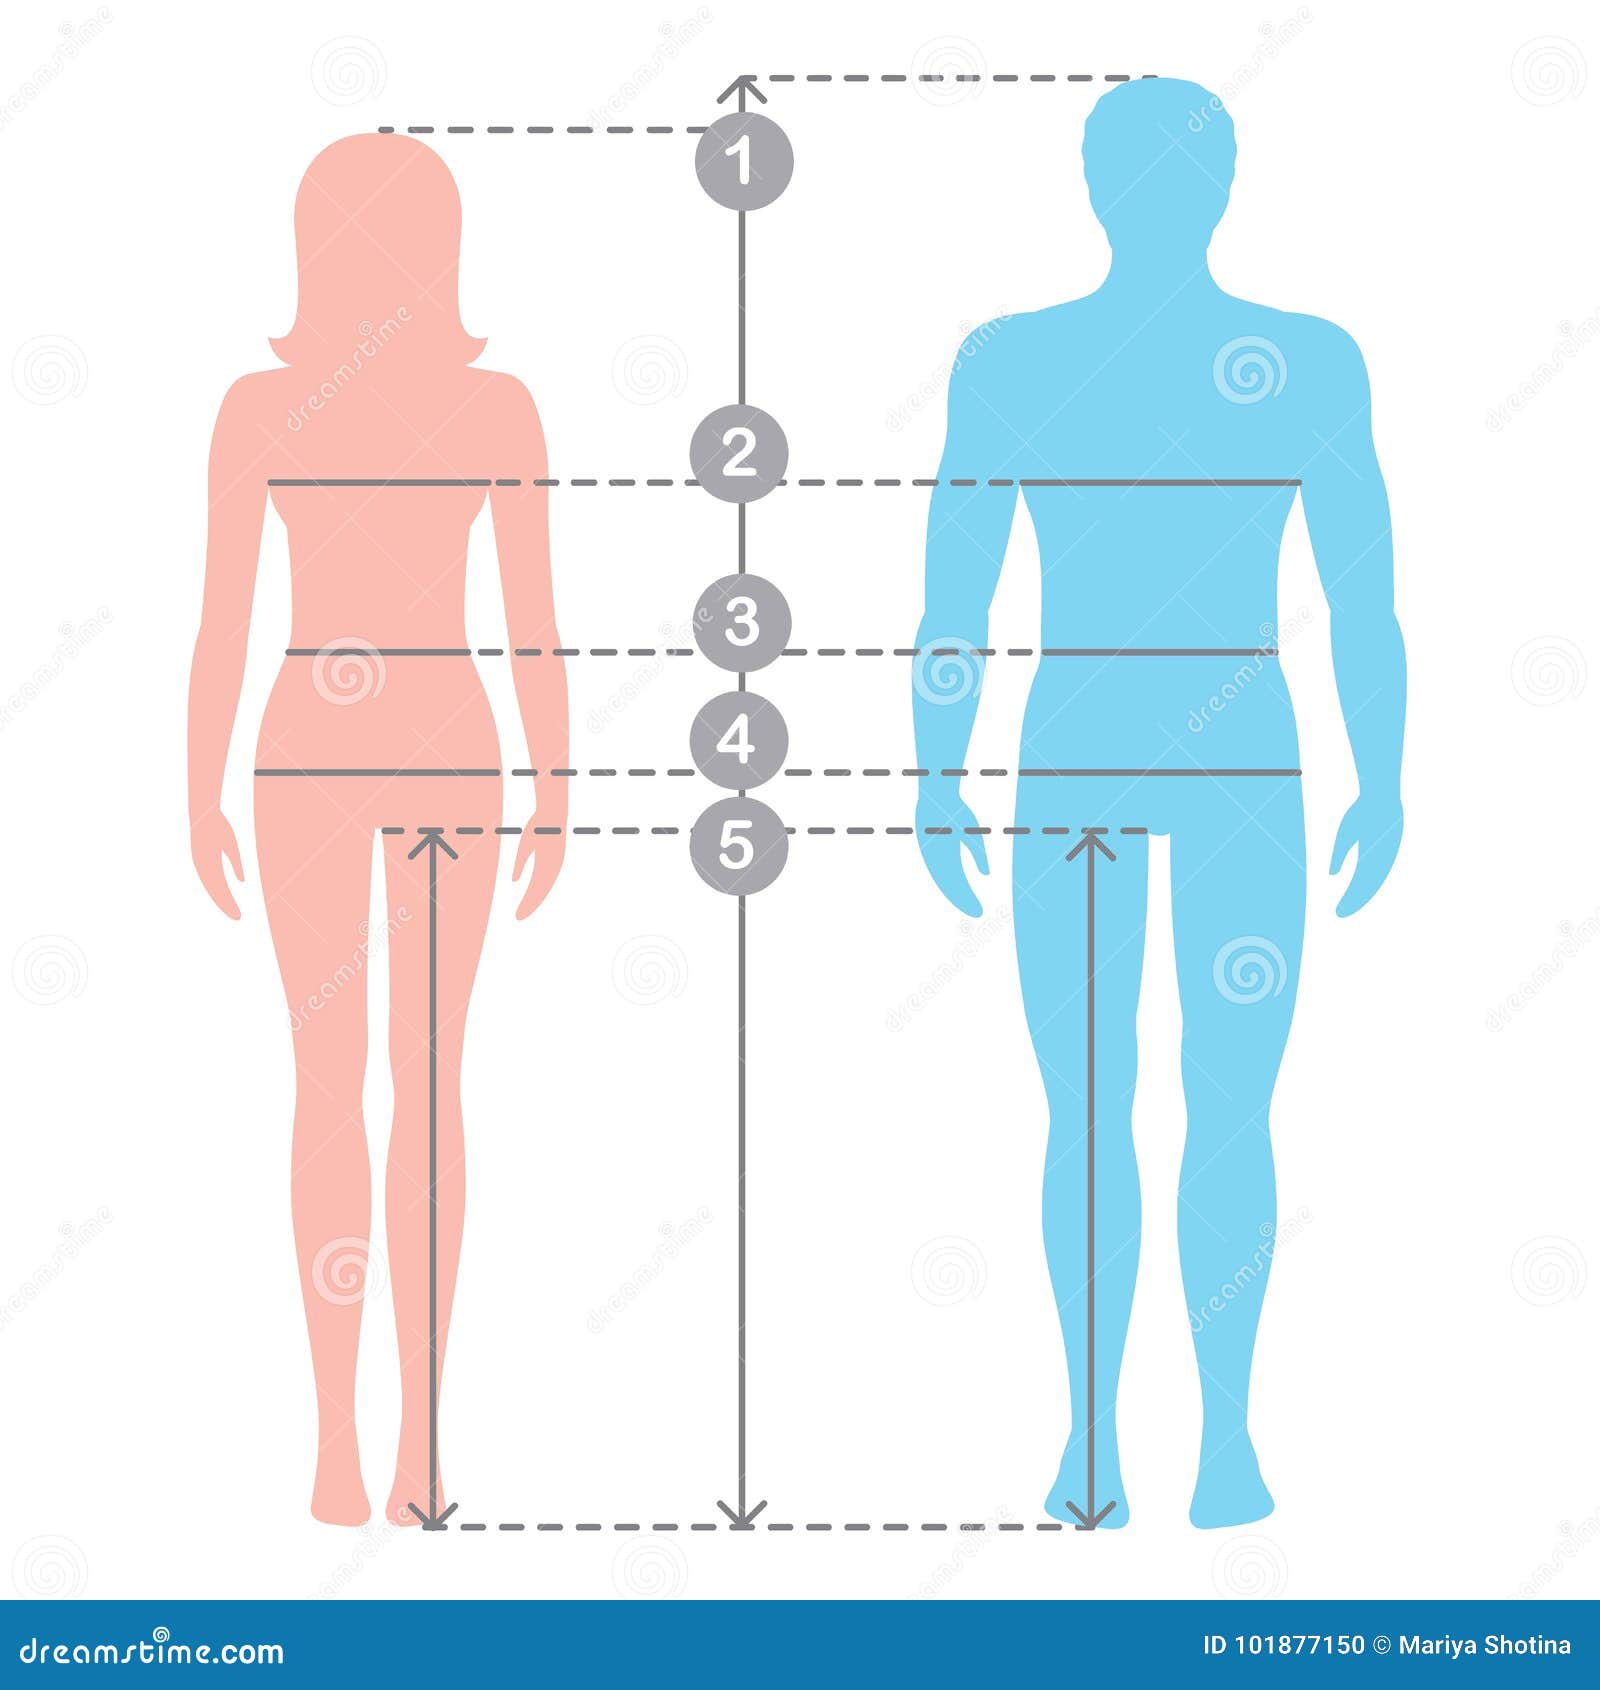 https://thumbs.dreamstime.com/z/silhuettes-man-women-full-length-measurement-lines-body-parameters-human-measurements-proportions-sizes-stock-101877150.jpg